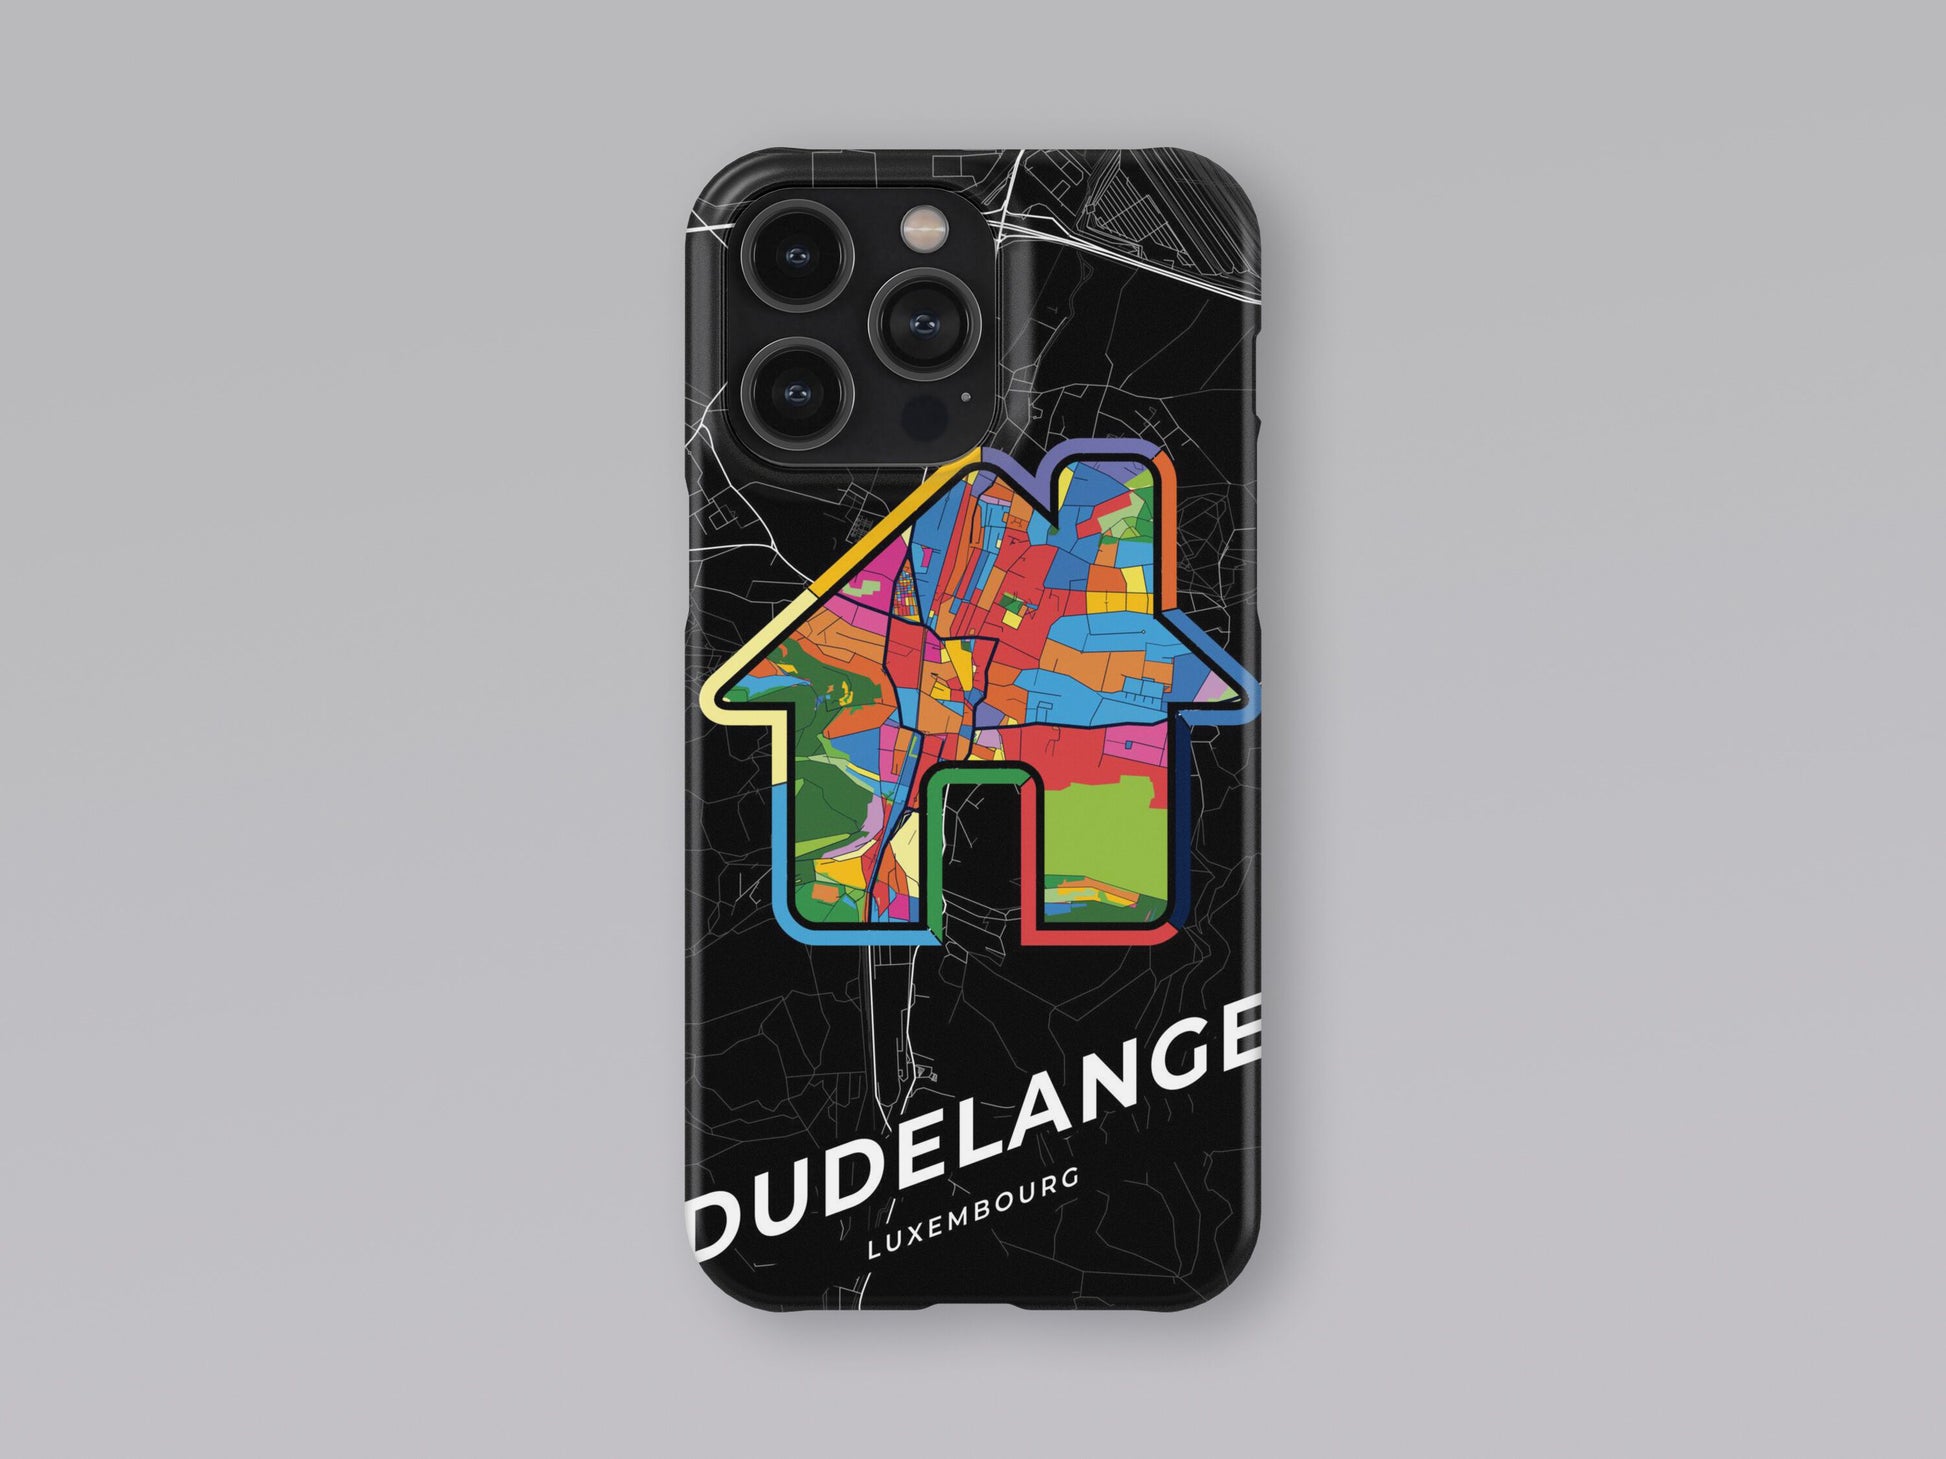 Dudelange Luxembourg slim phone case with colorful icon. Birthday, wedding or housewarming gift. Couple match cases. 3